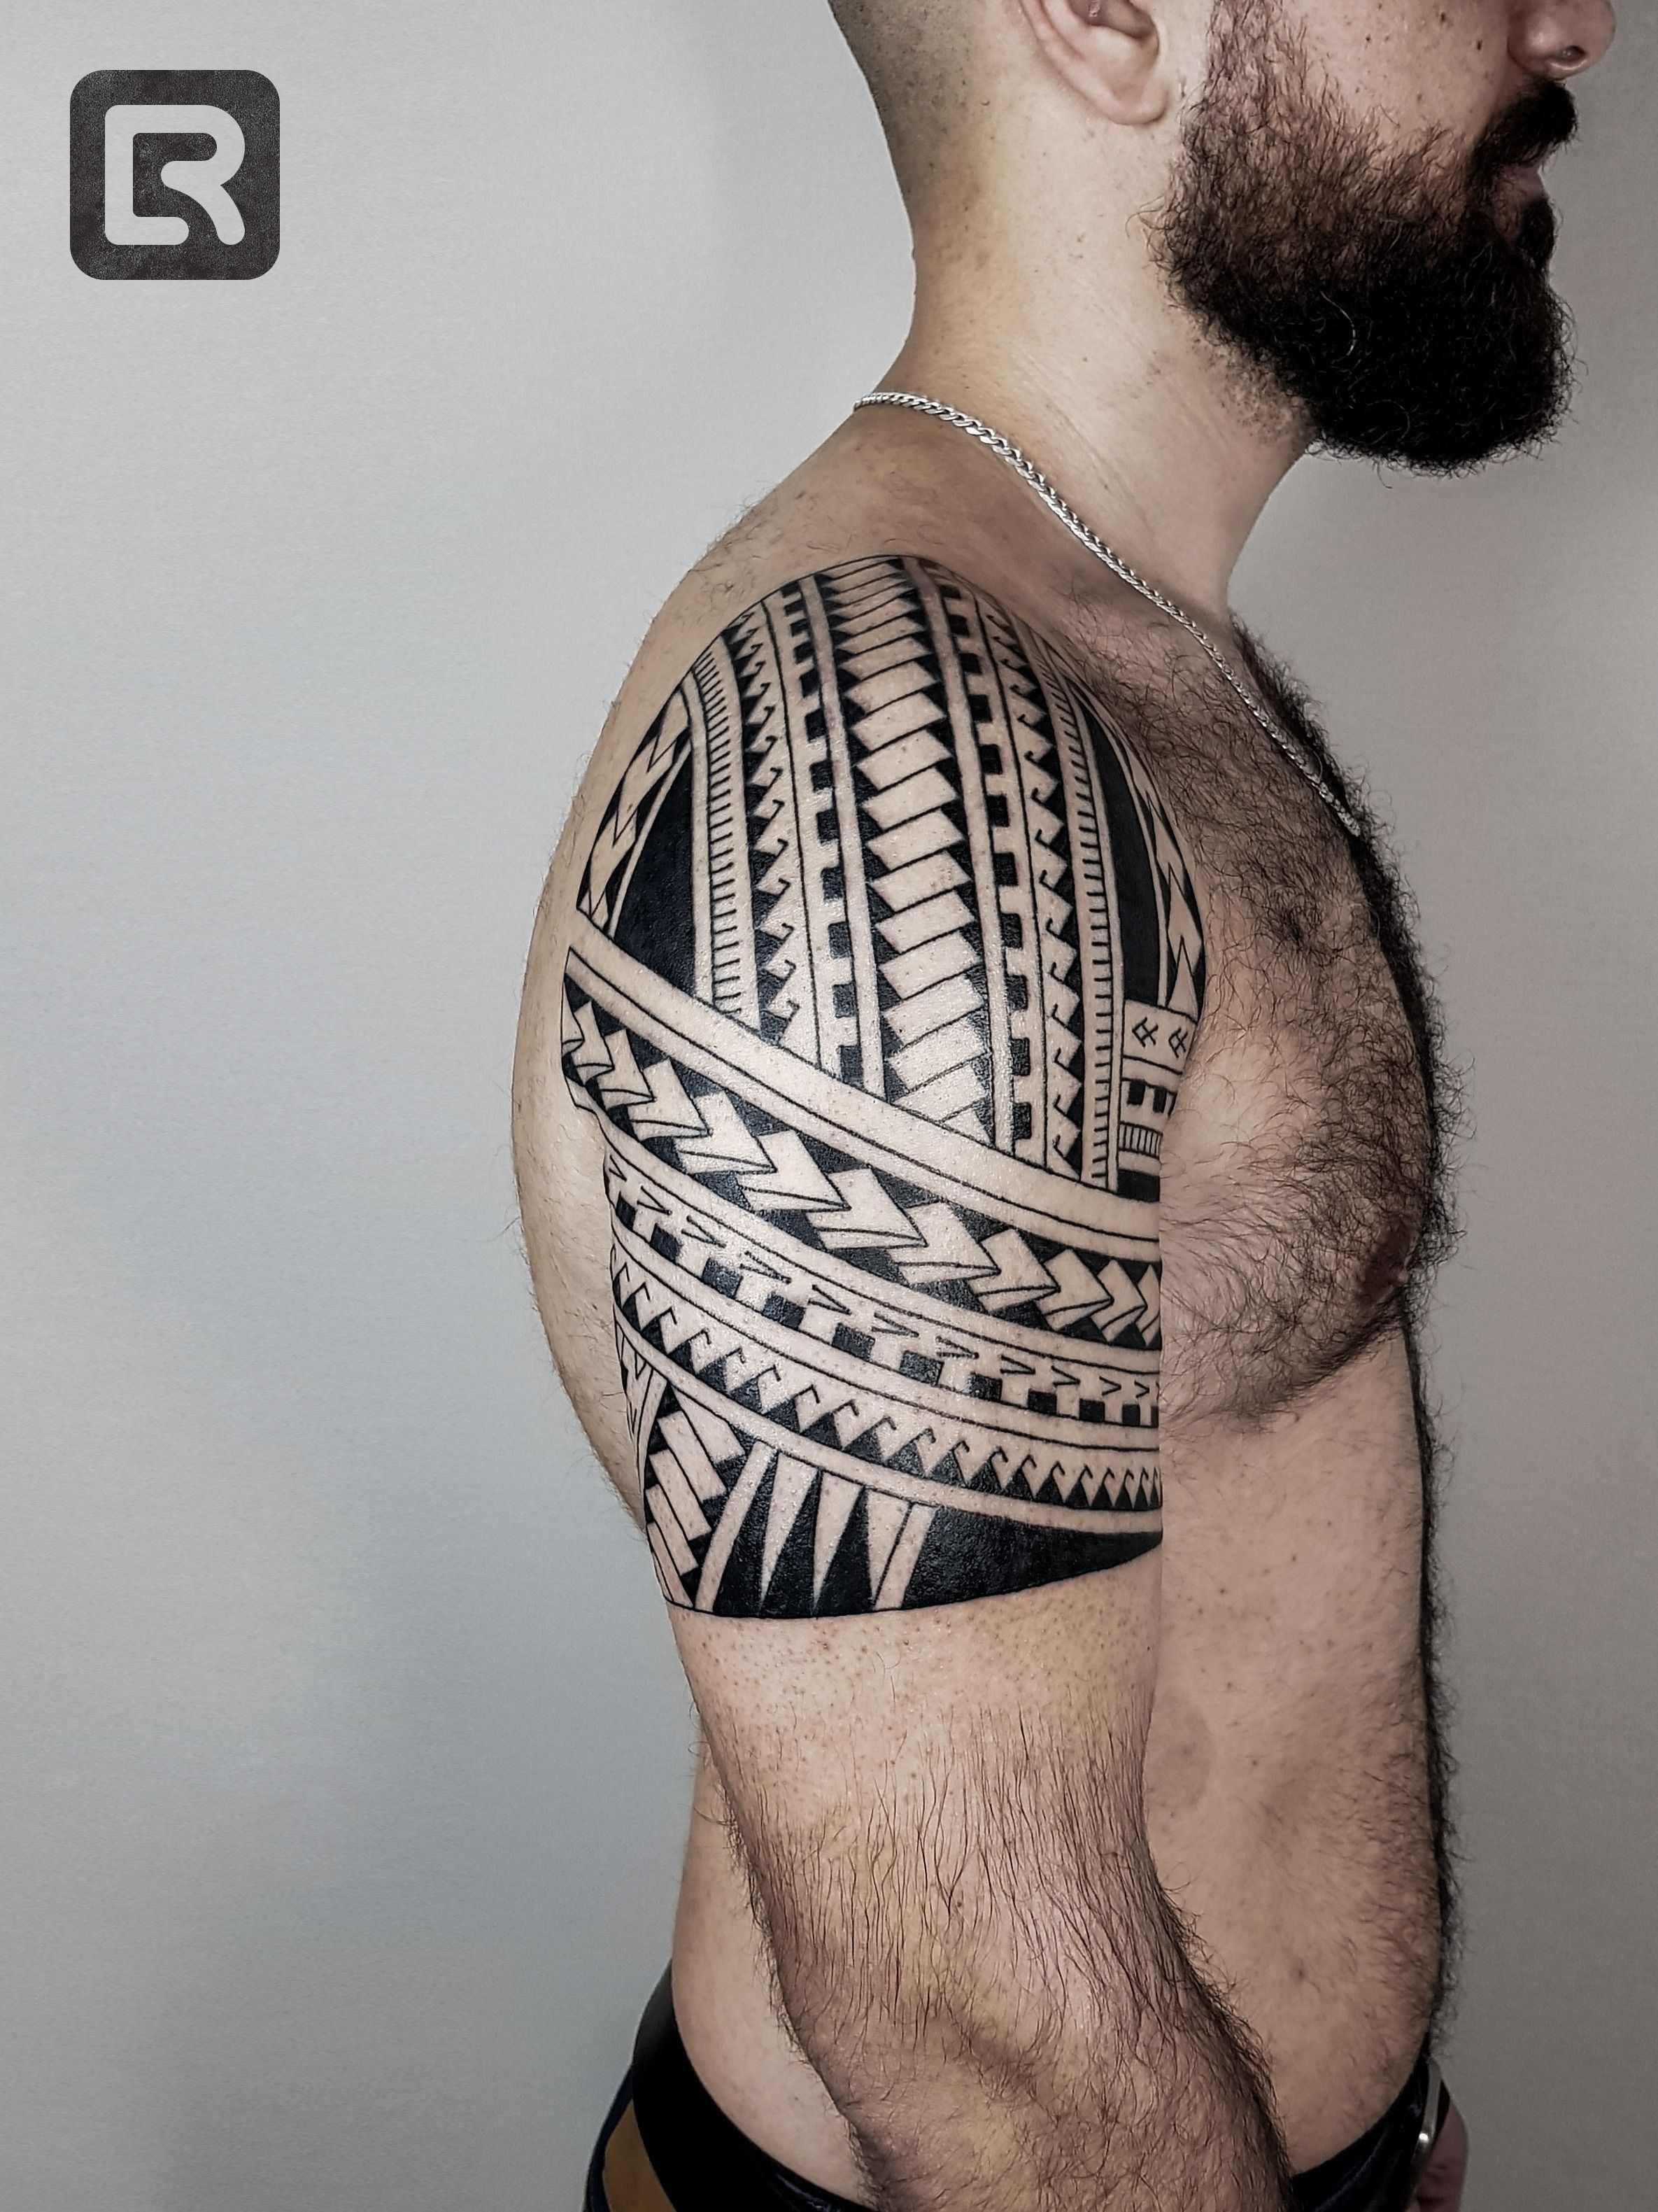 40 Tribal Neck Tattoos For Men  Manly Ink Ideas  Tribal neck tattoos  Marquesan tattoos Polynesian tattoo